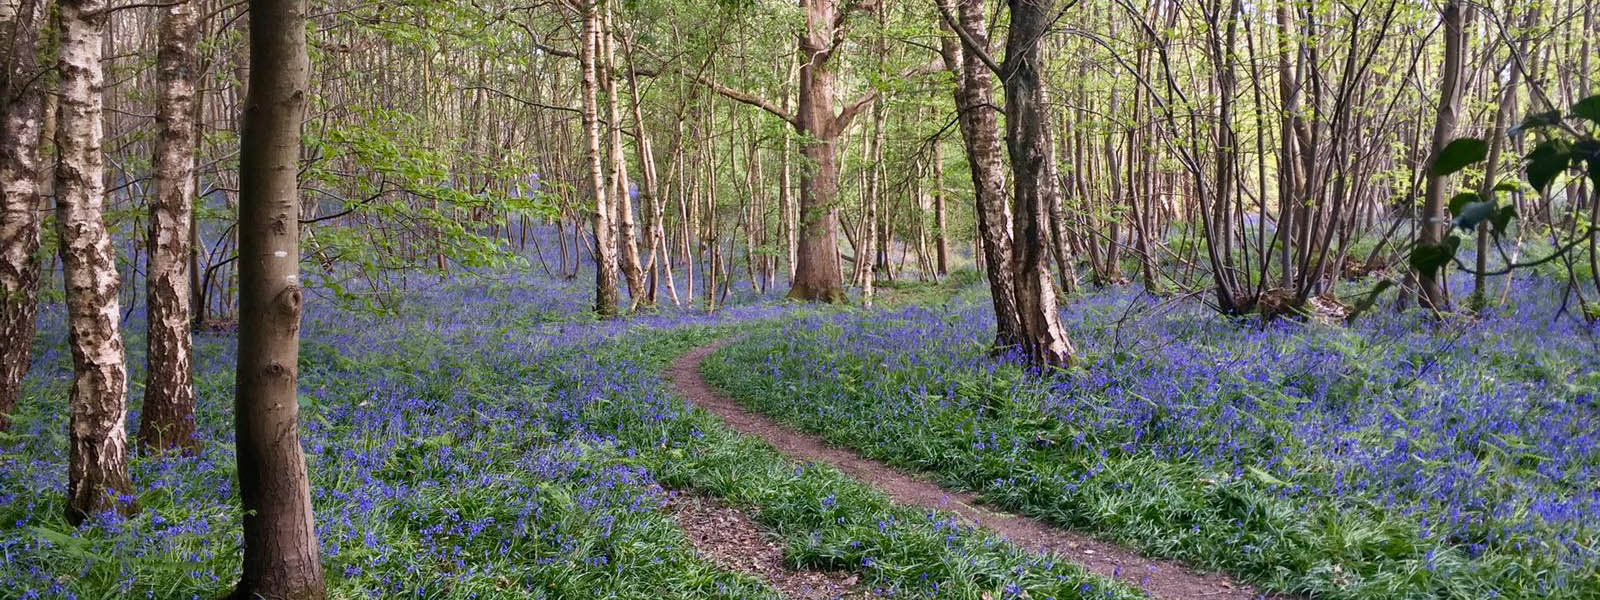 A woodland full of bluebells